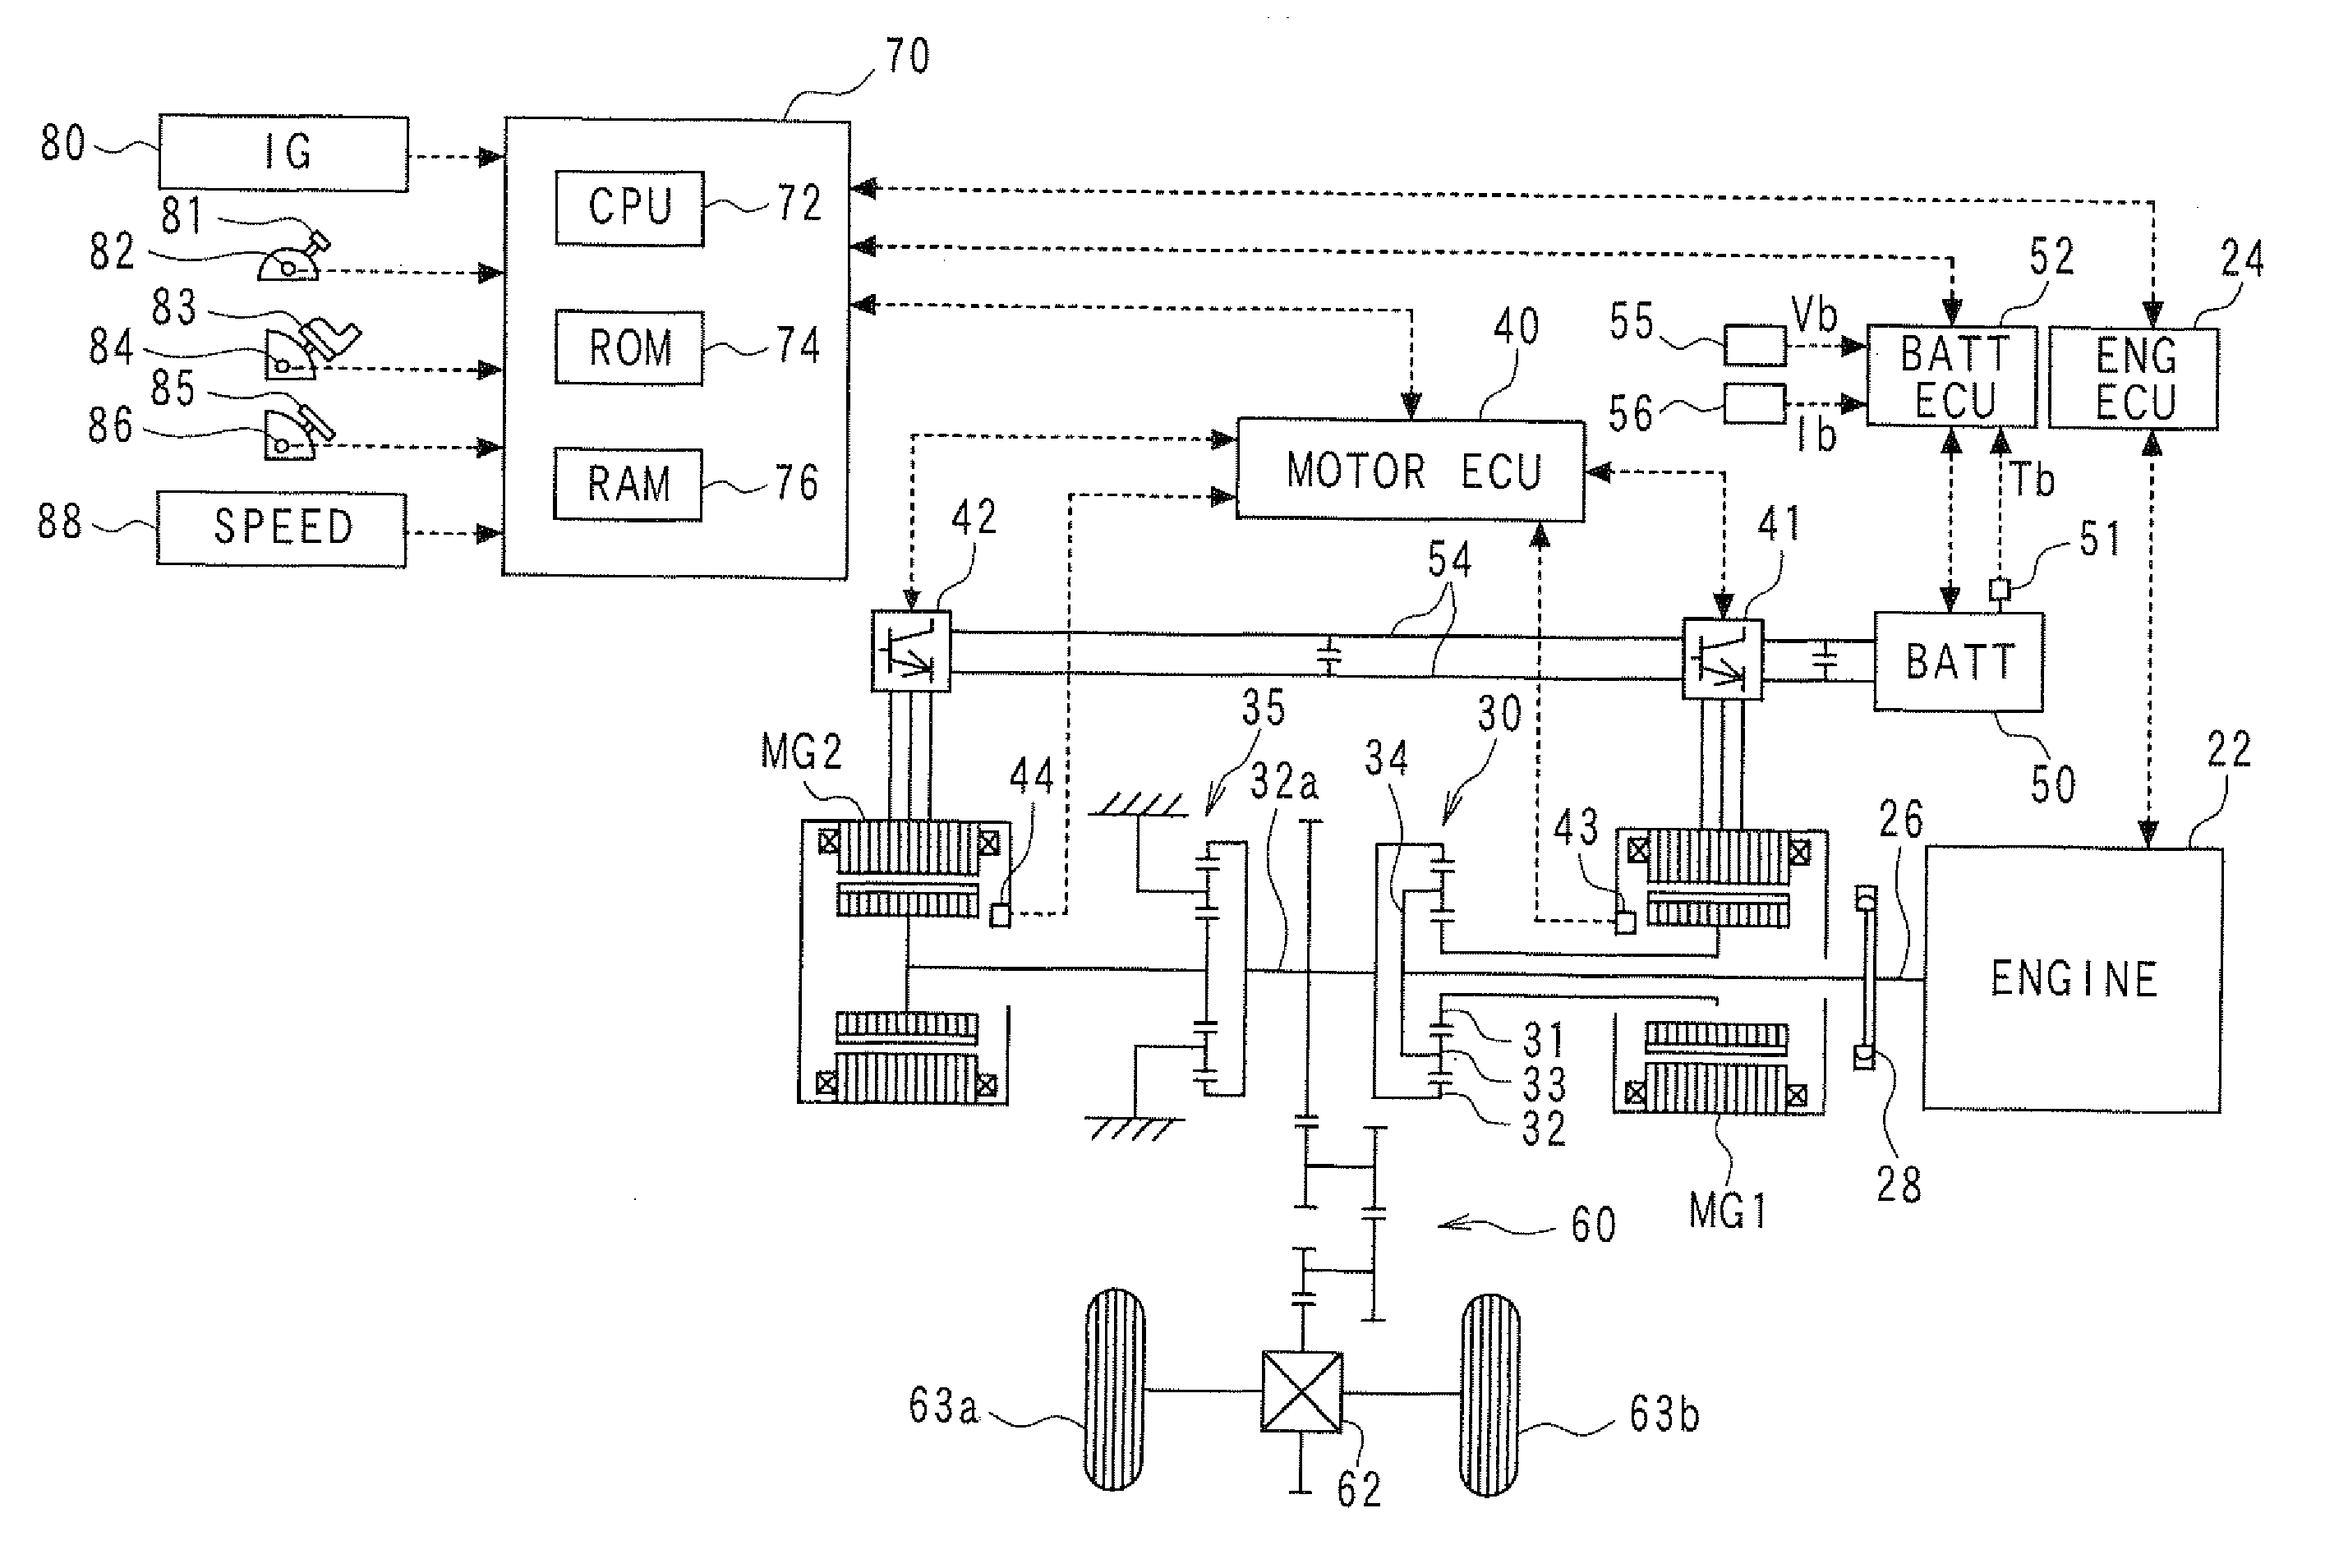 Method and apparatus for charge discharge power control